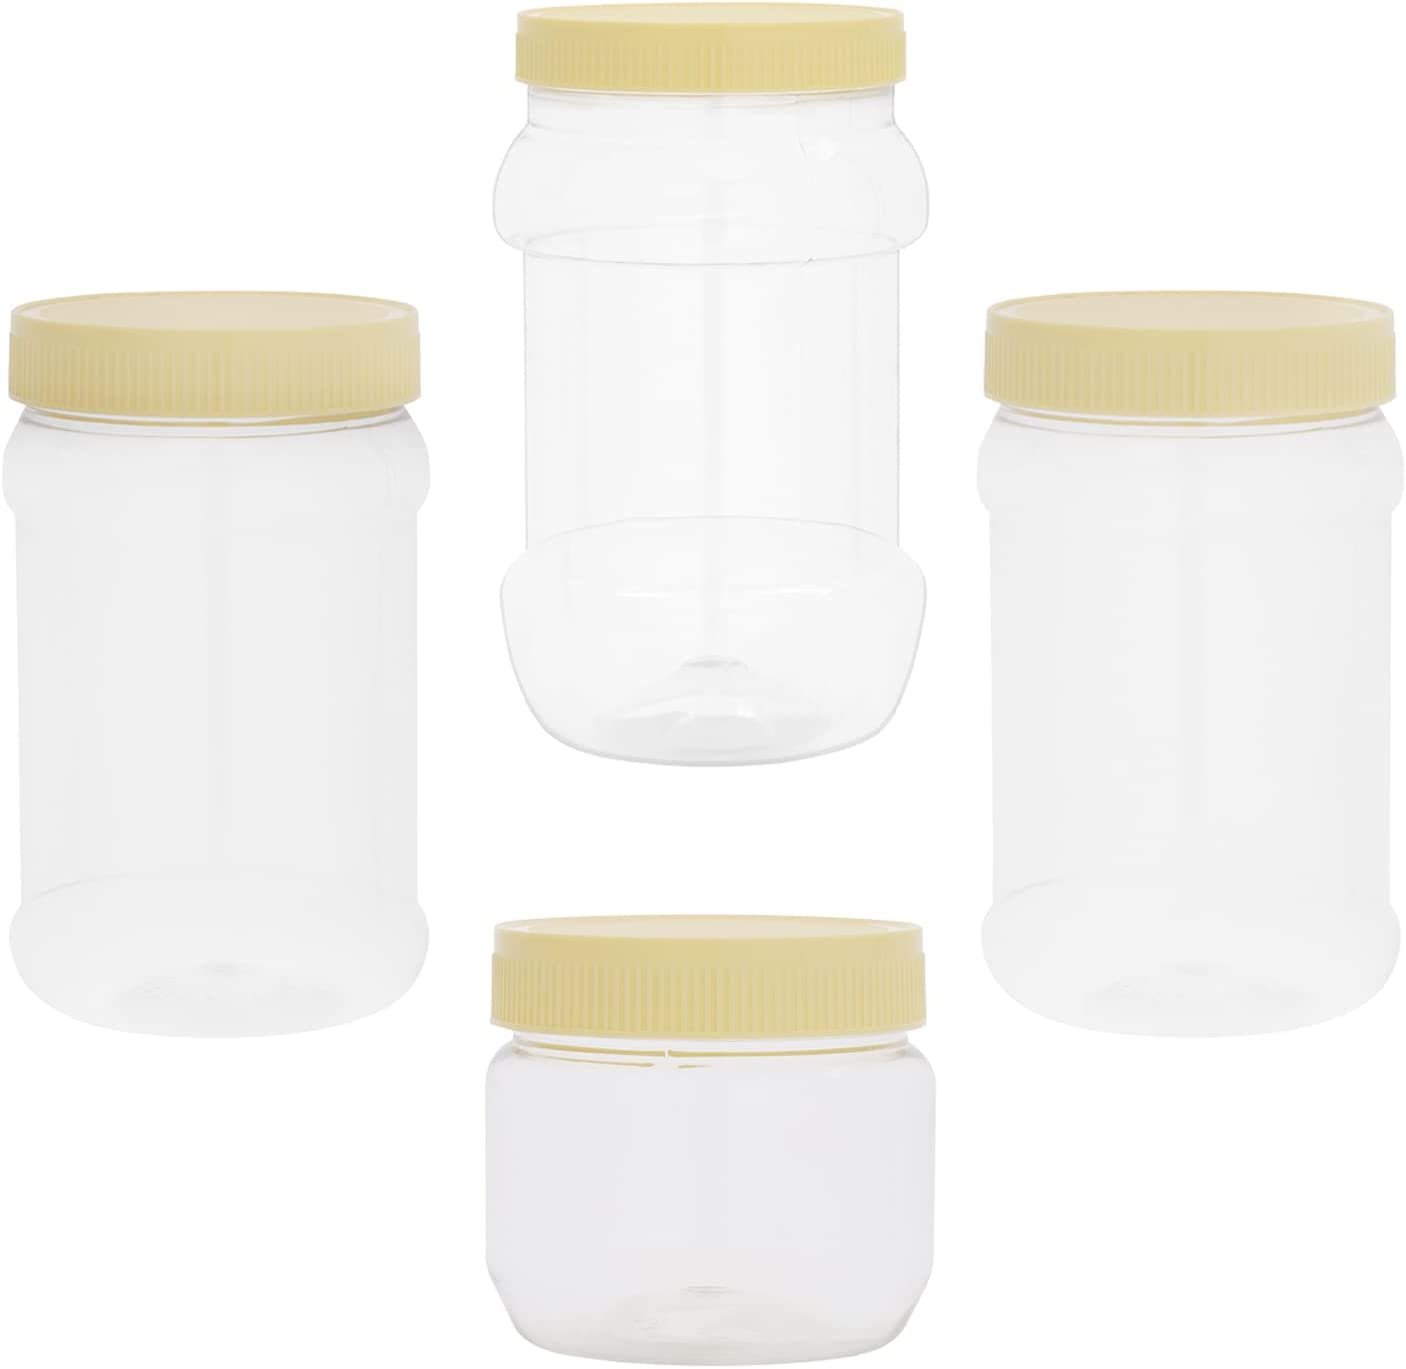 Set Of 4 Refillable Air-Tight Storage Containers